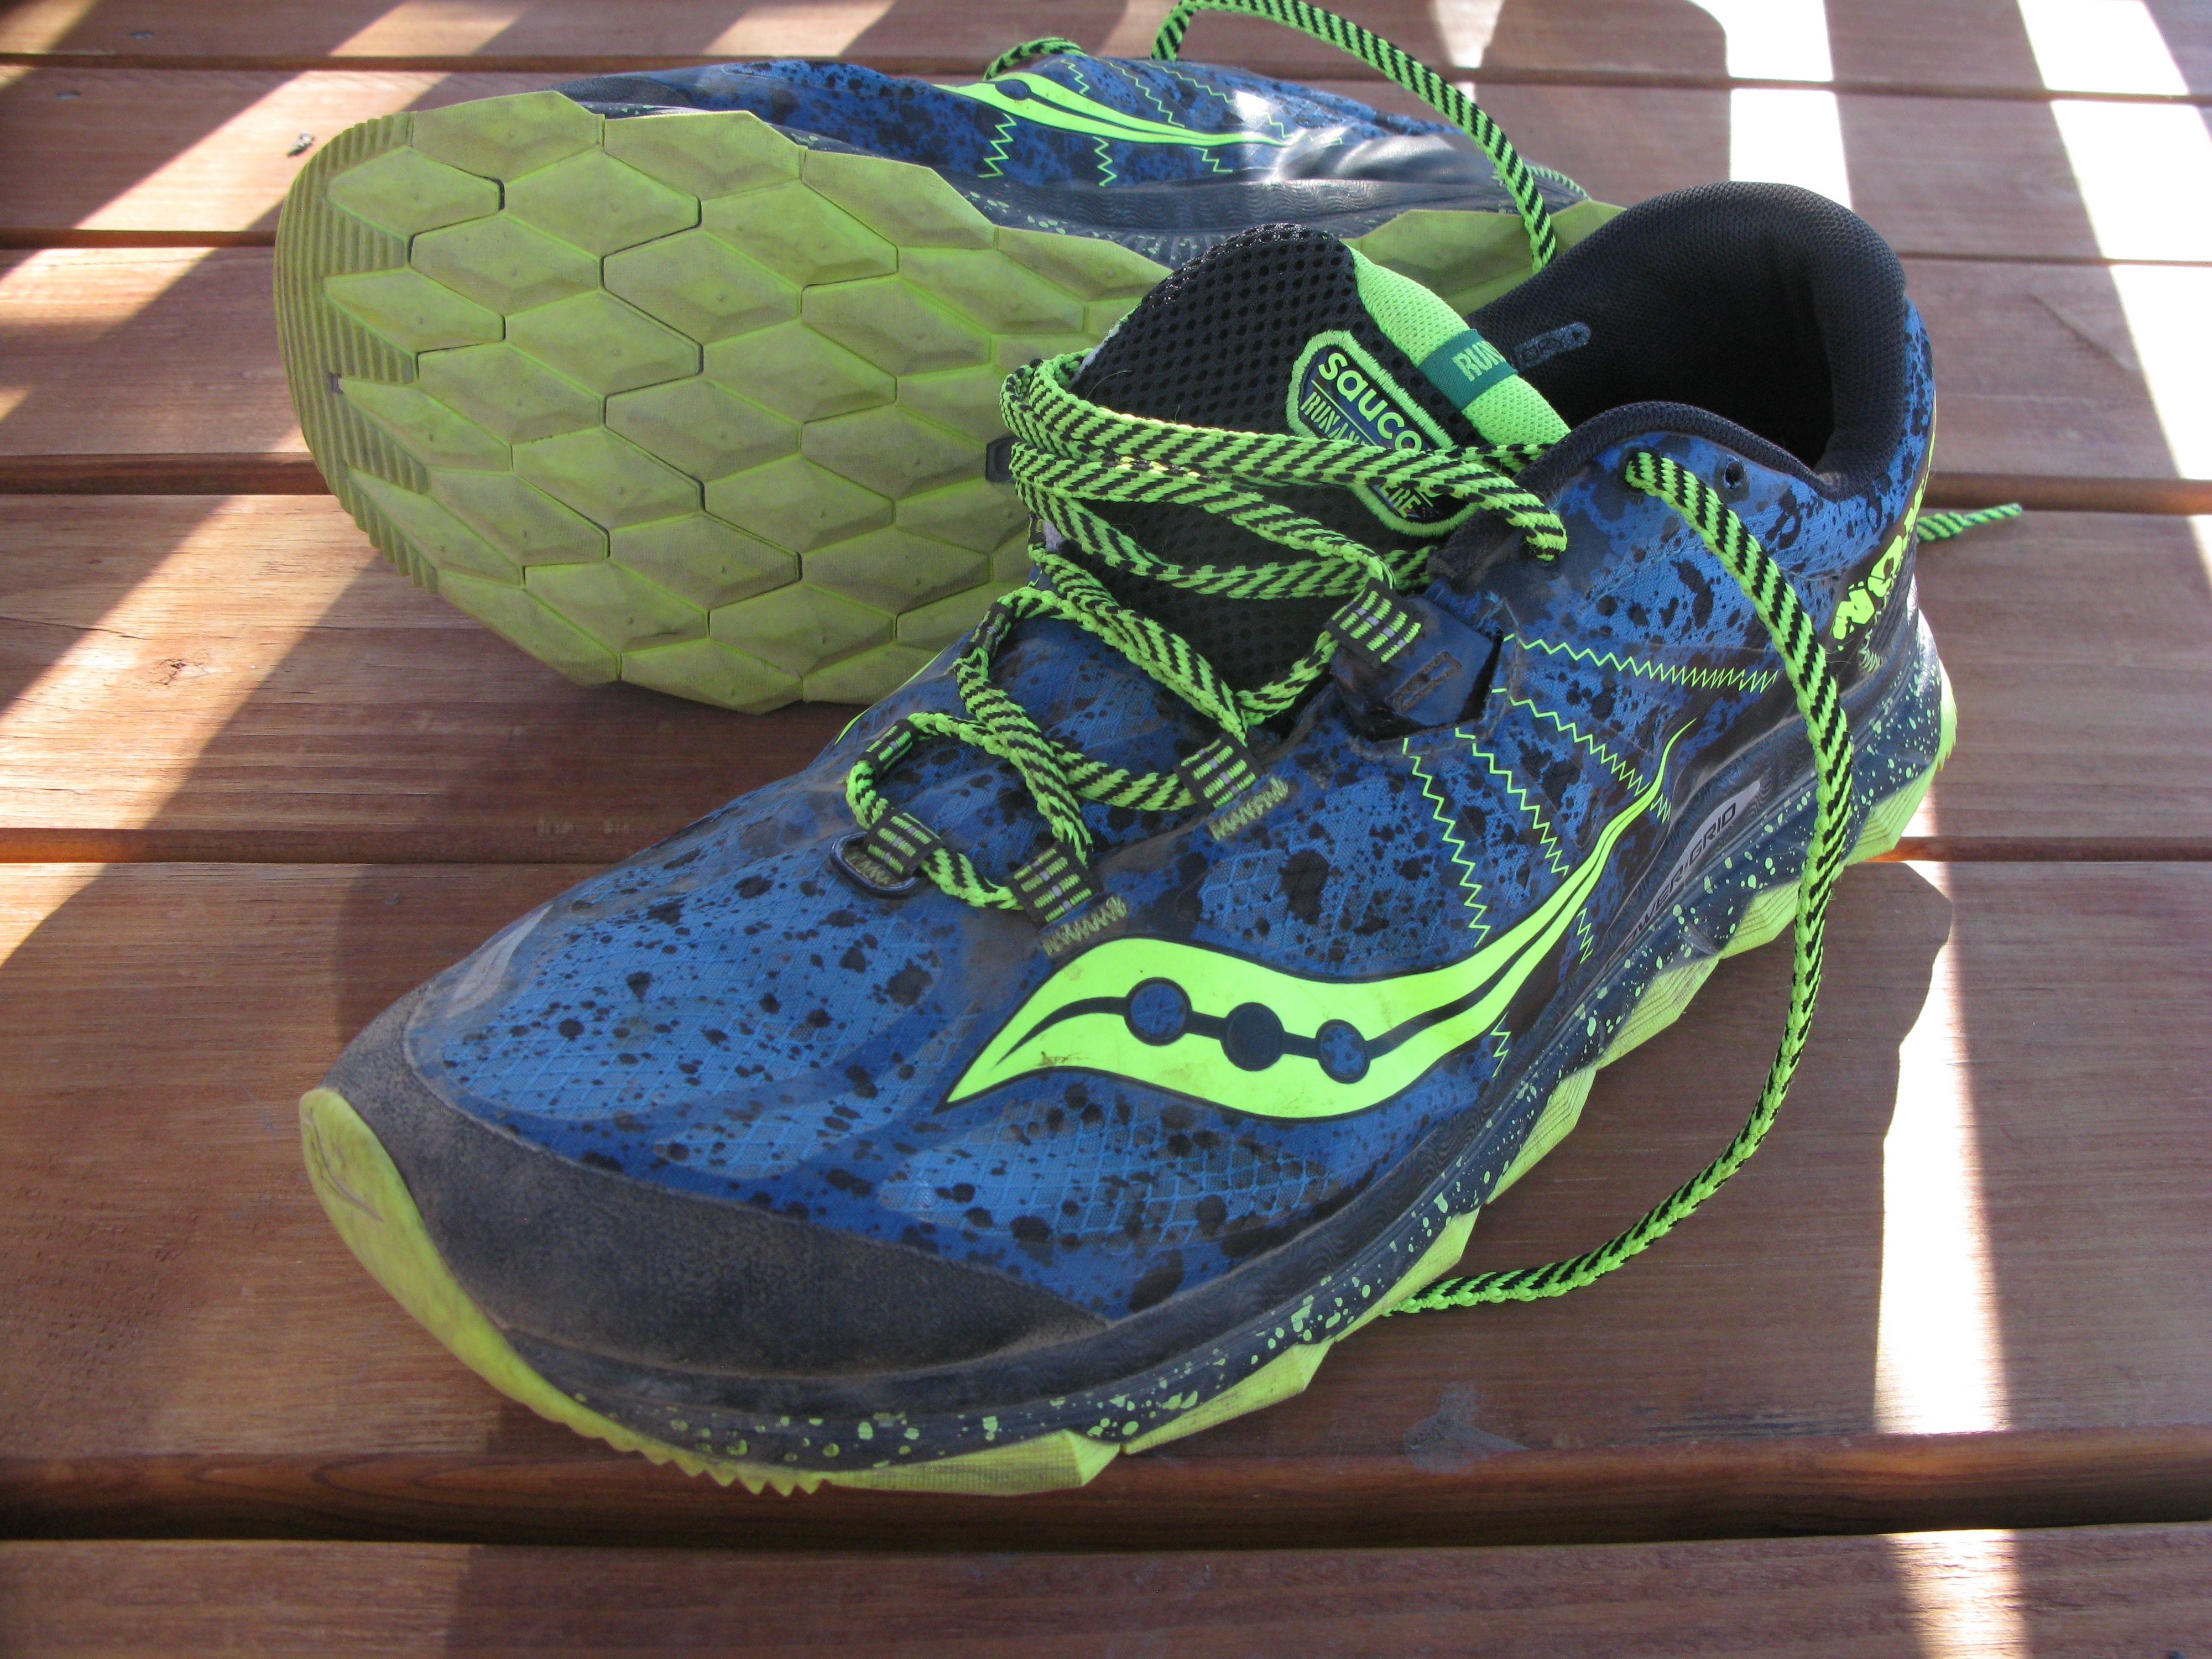 saucony discontinued running shoes